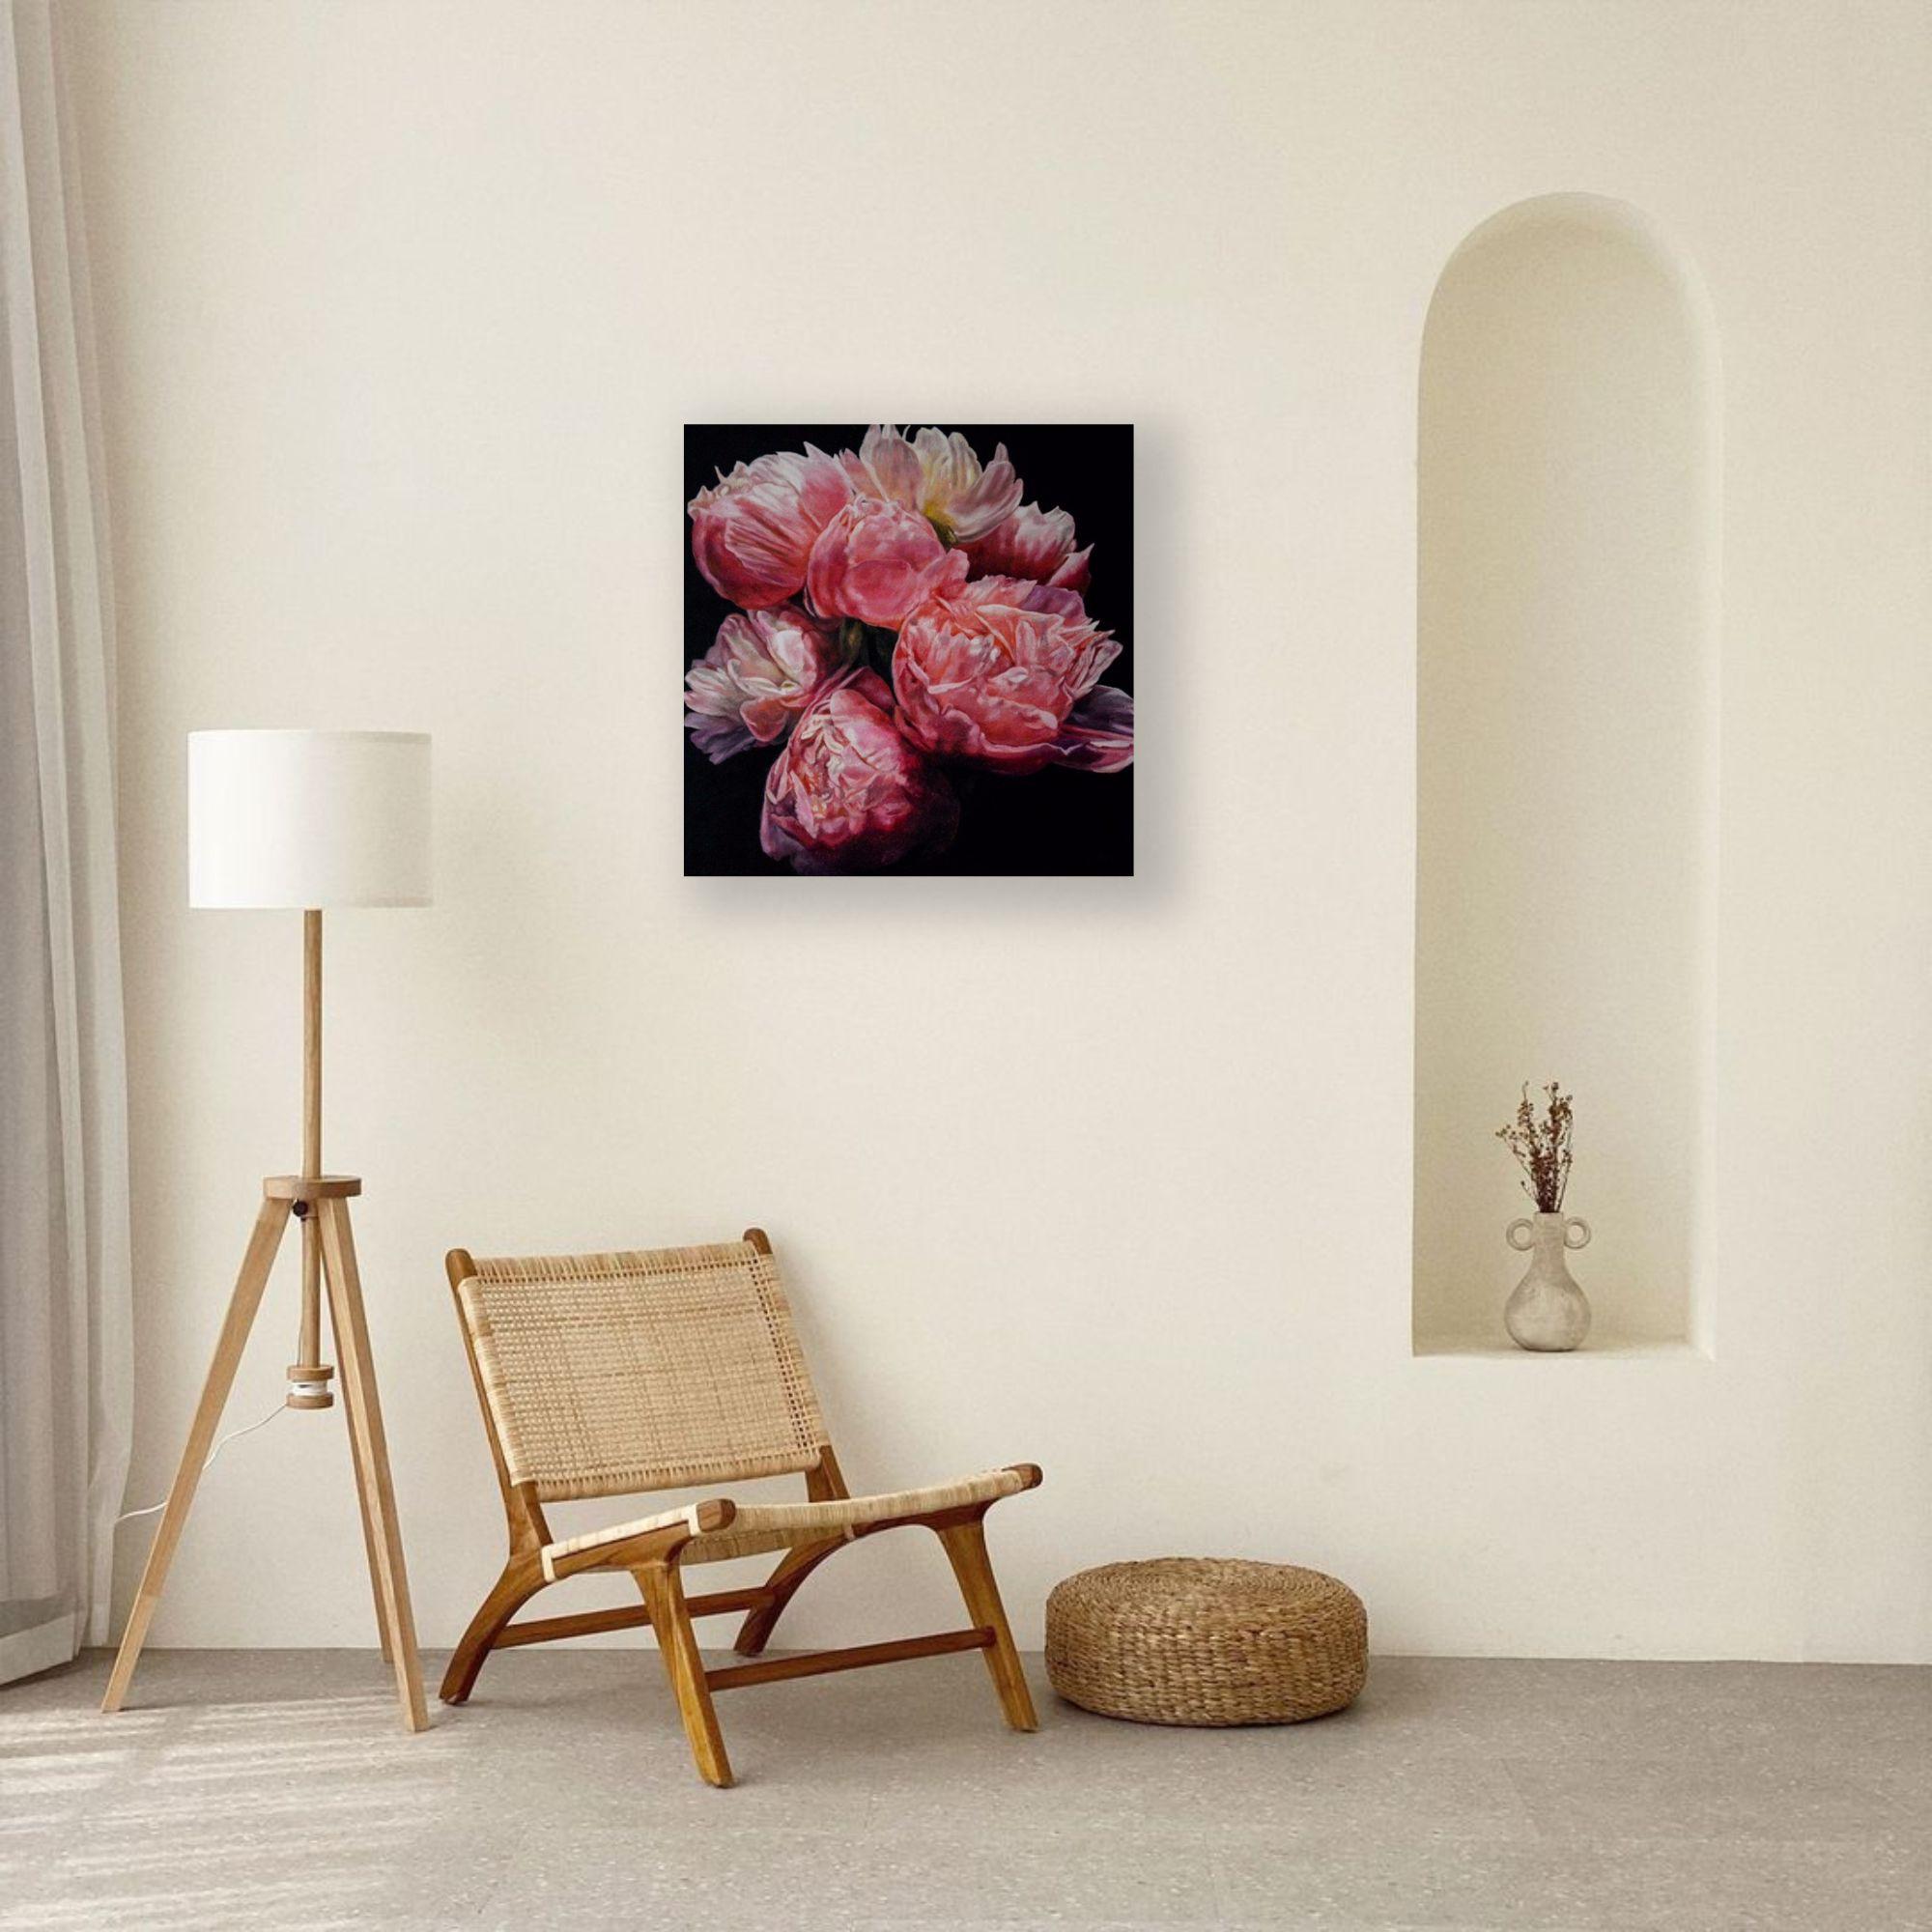 Coral Peonies-original modern realism floral oil painting-contemporary Art - Impressionist Painting by Robert Lemay